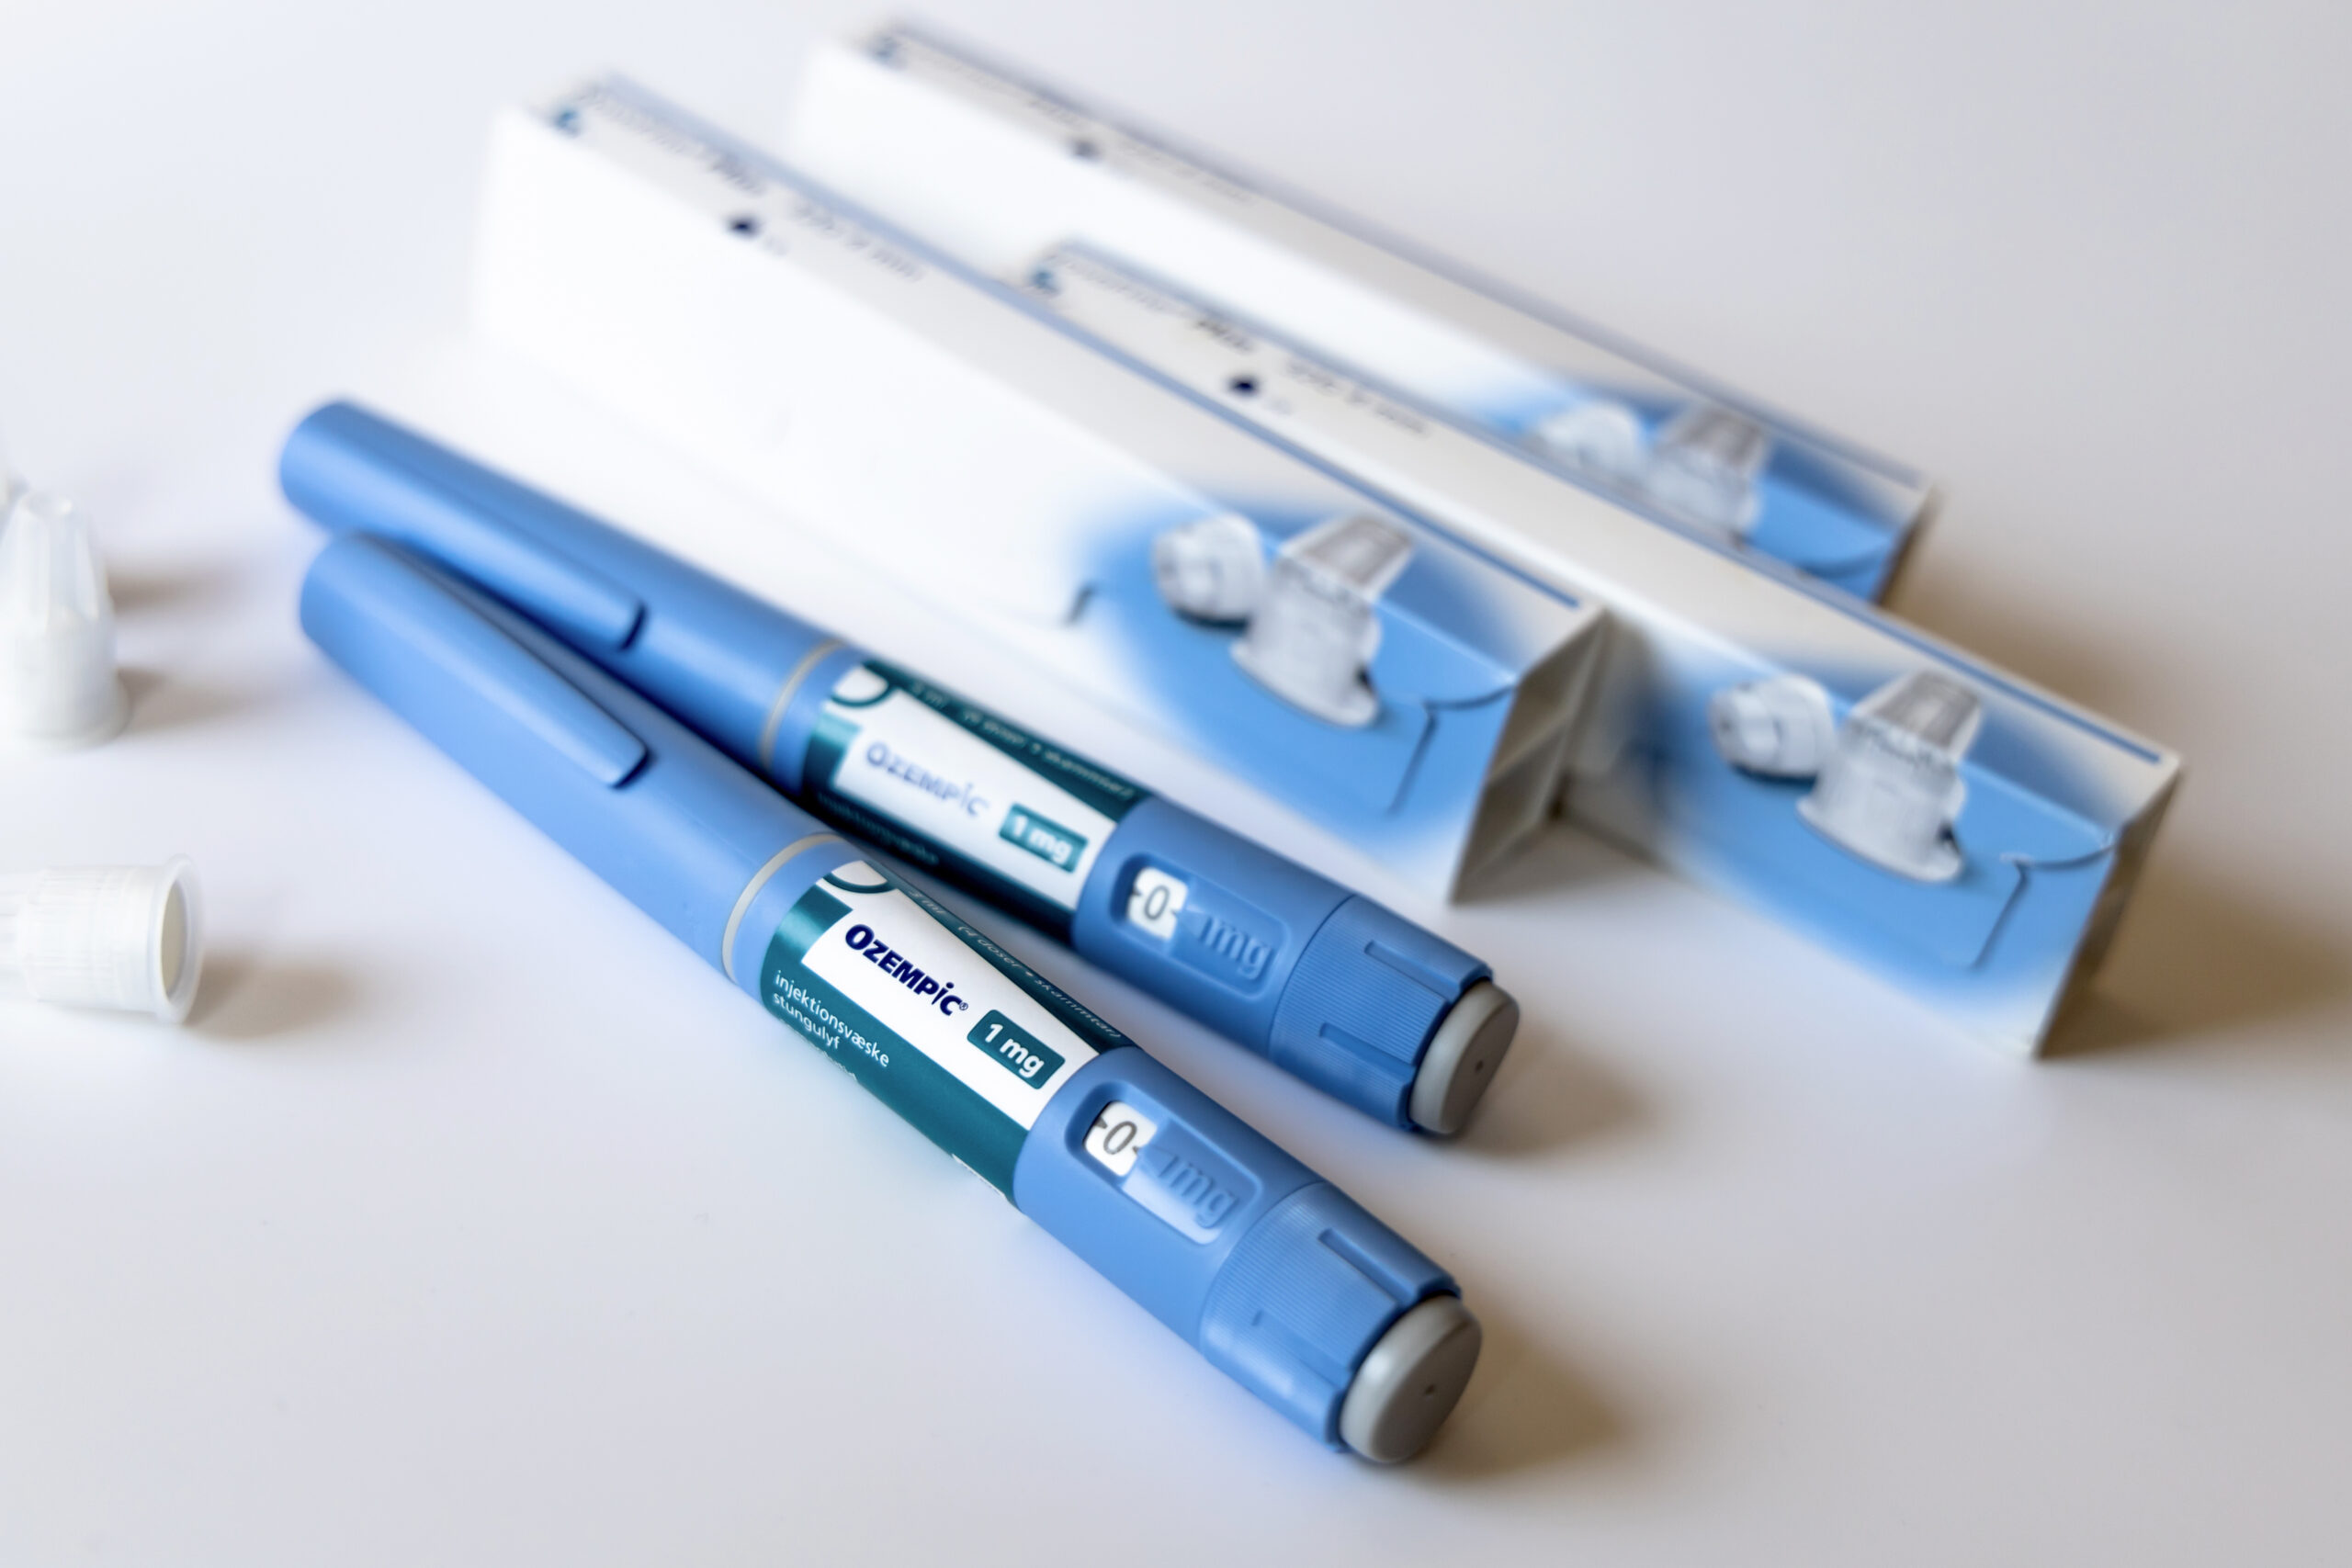 Ozempic injection pens